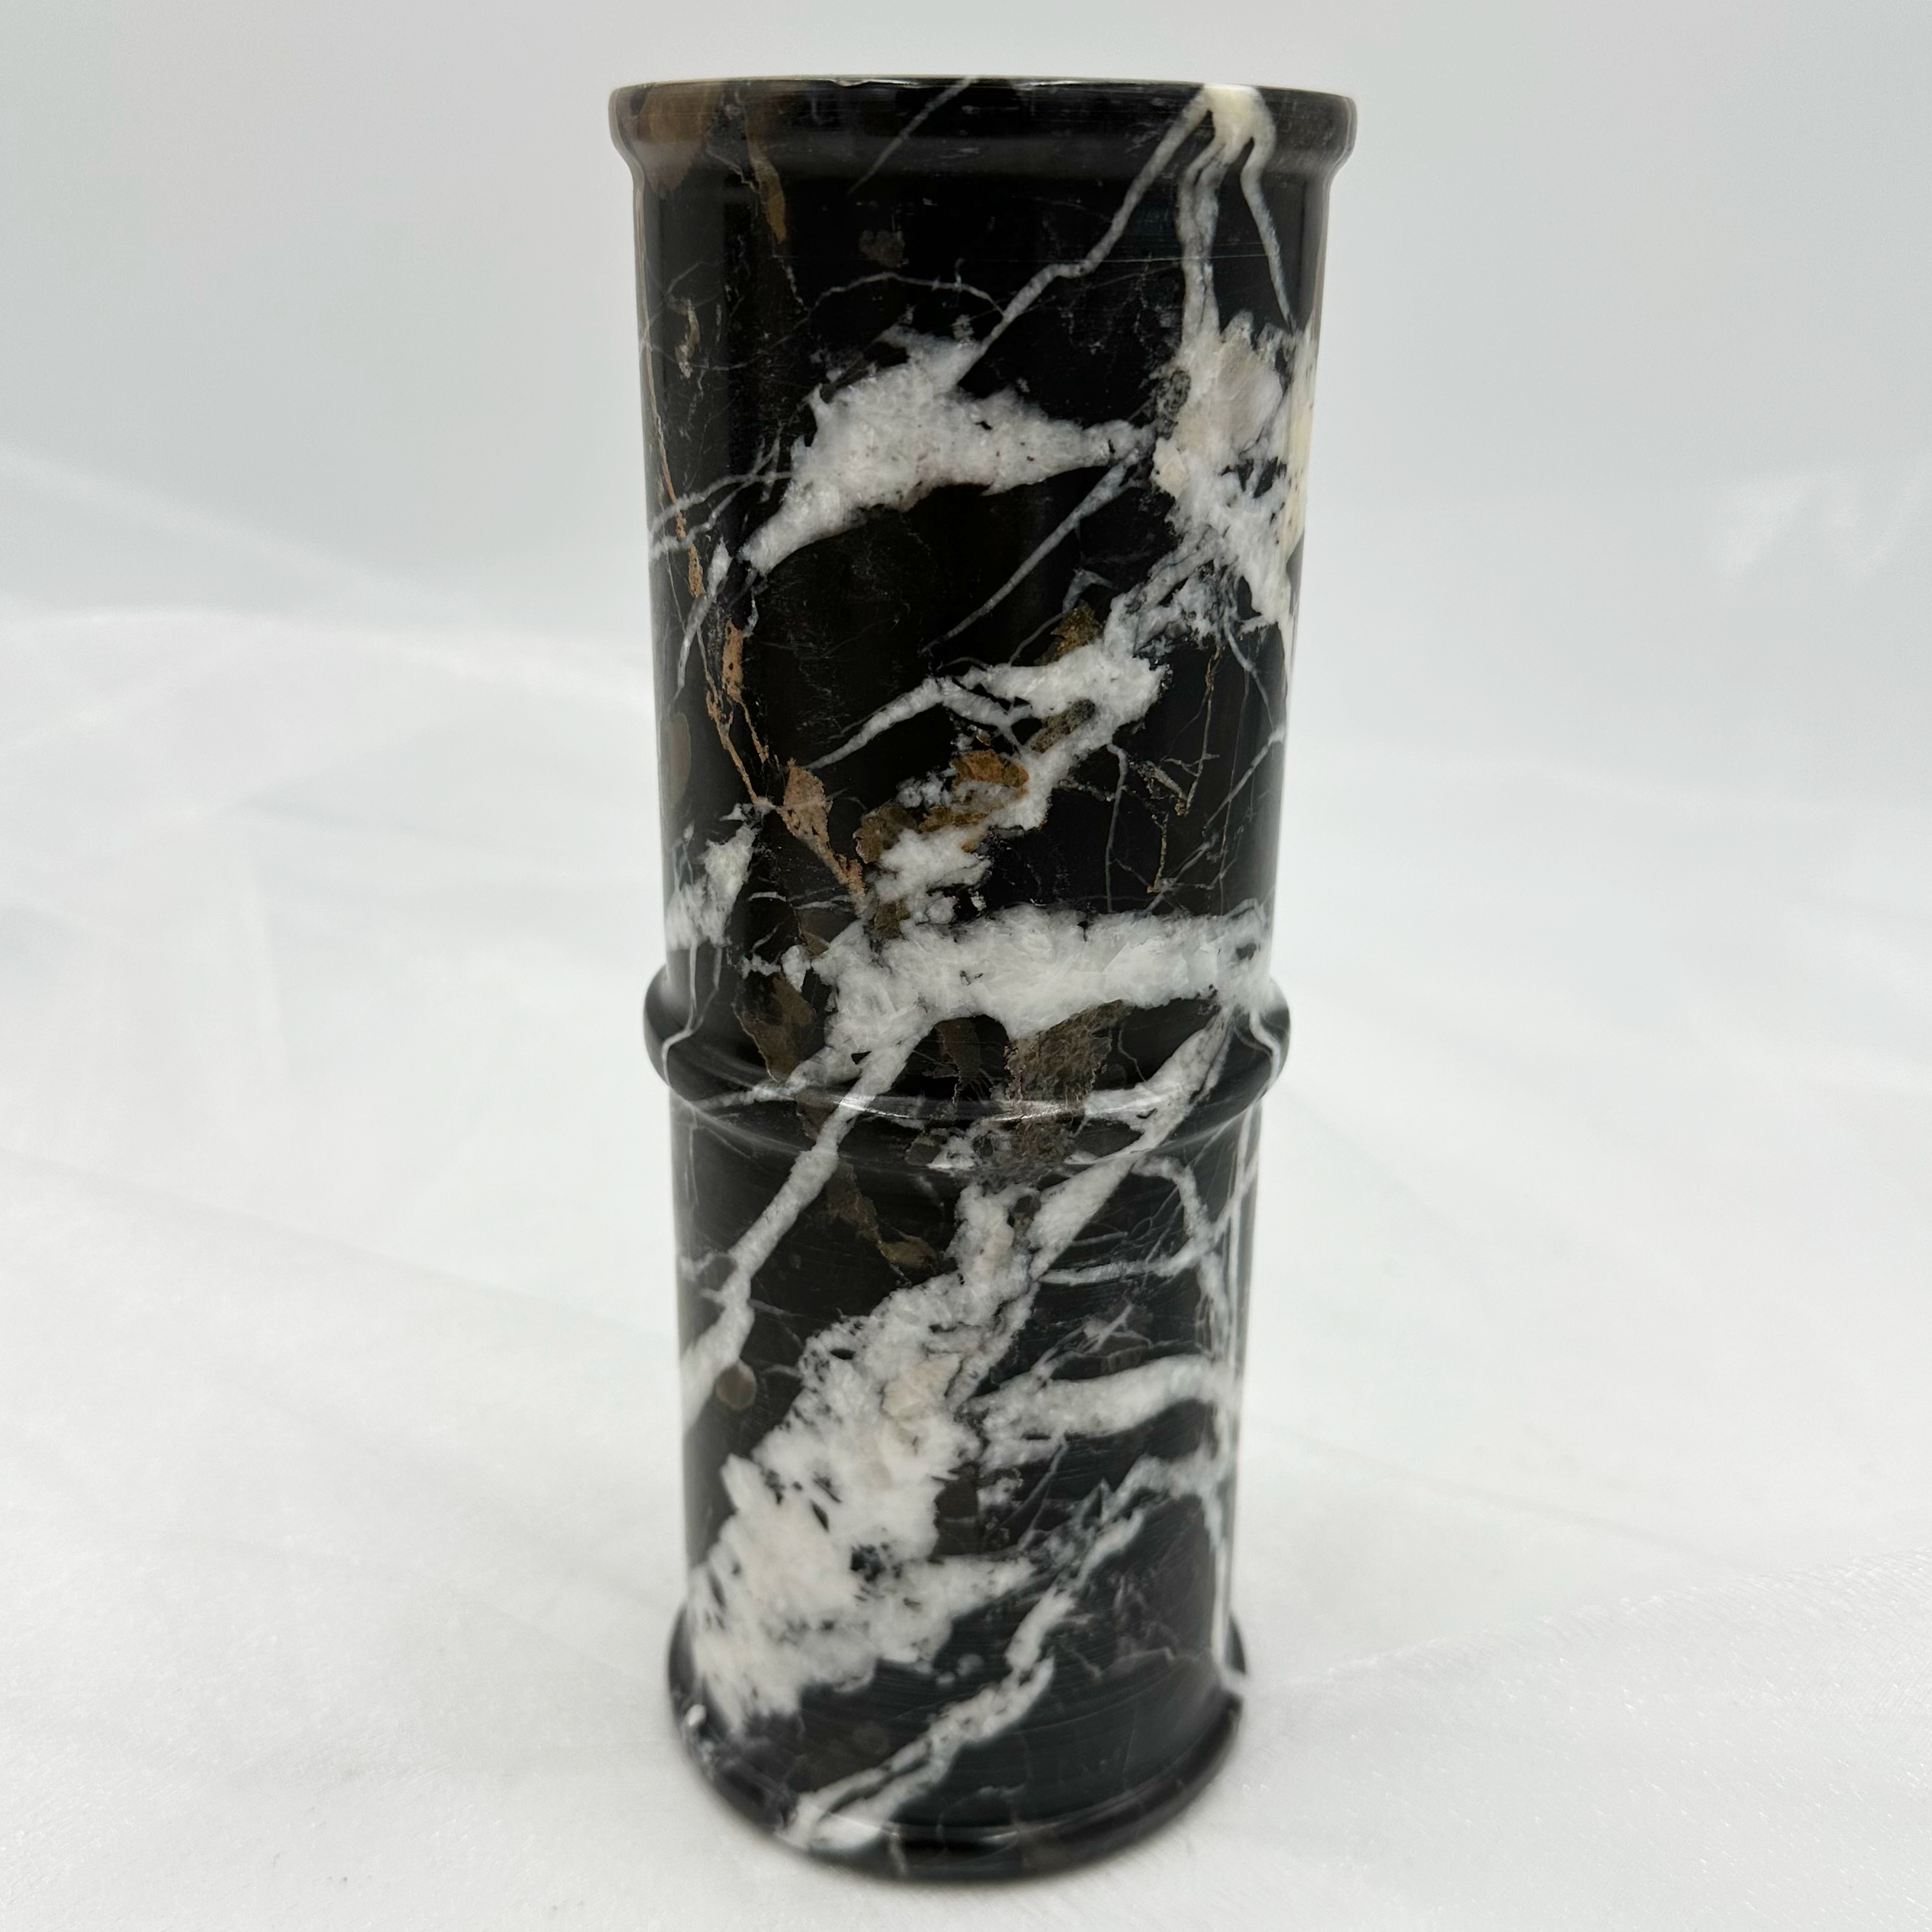 8" Cylindrical Vase in Marble & Onyx: Black & Gold Marble